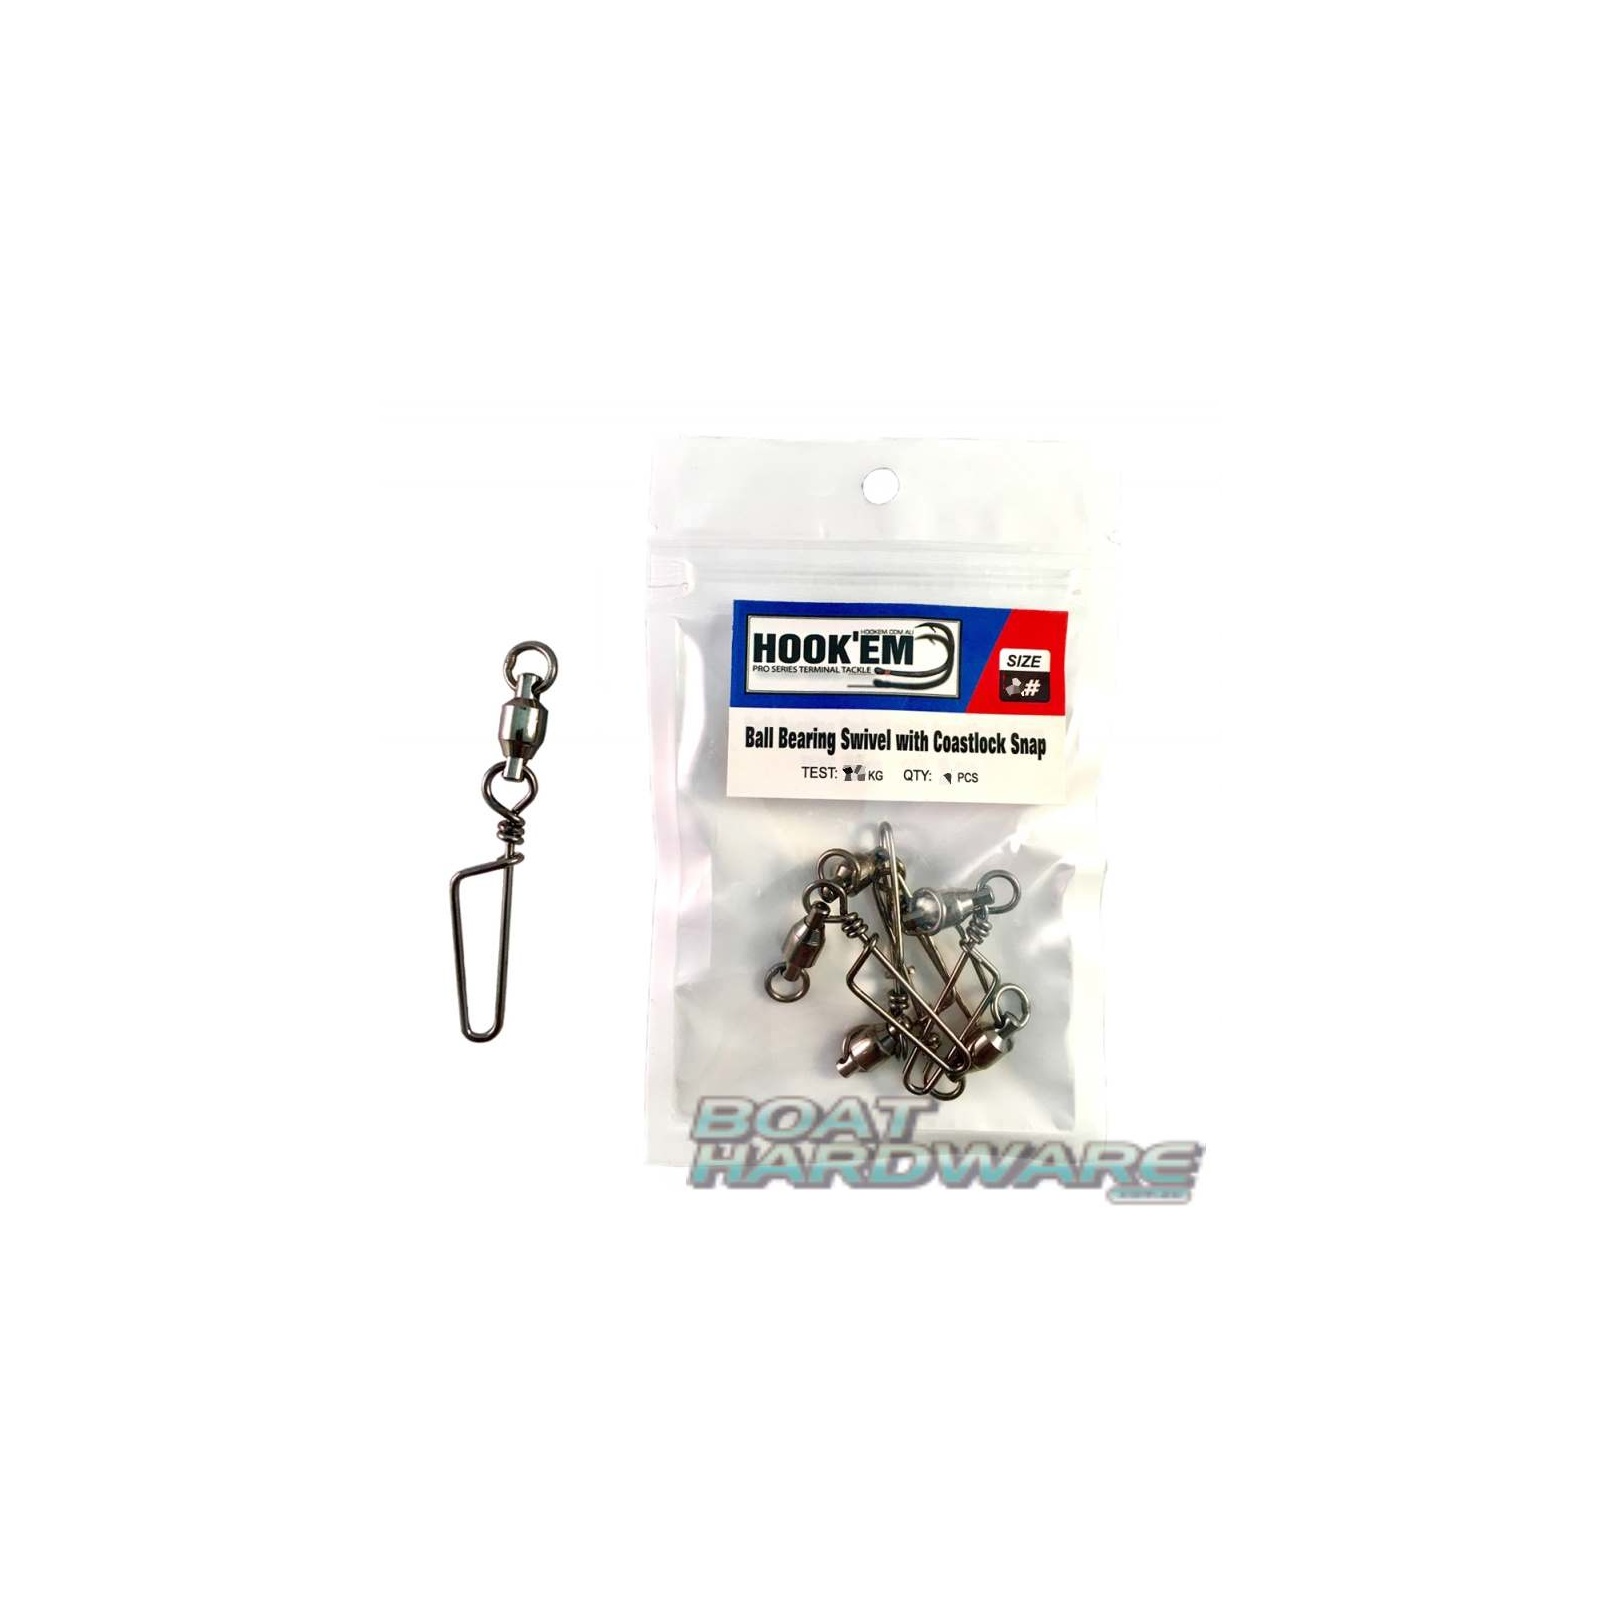 Size 5 Ball Bearing Swivel with Coastlock Snap (Pack of 6)